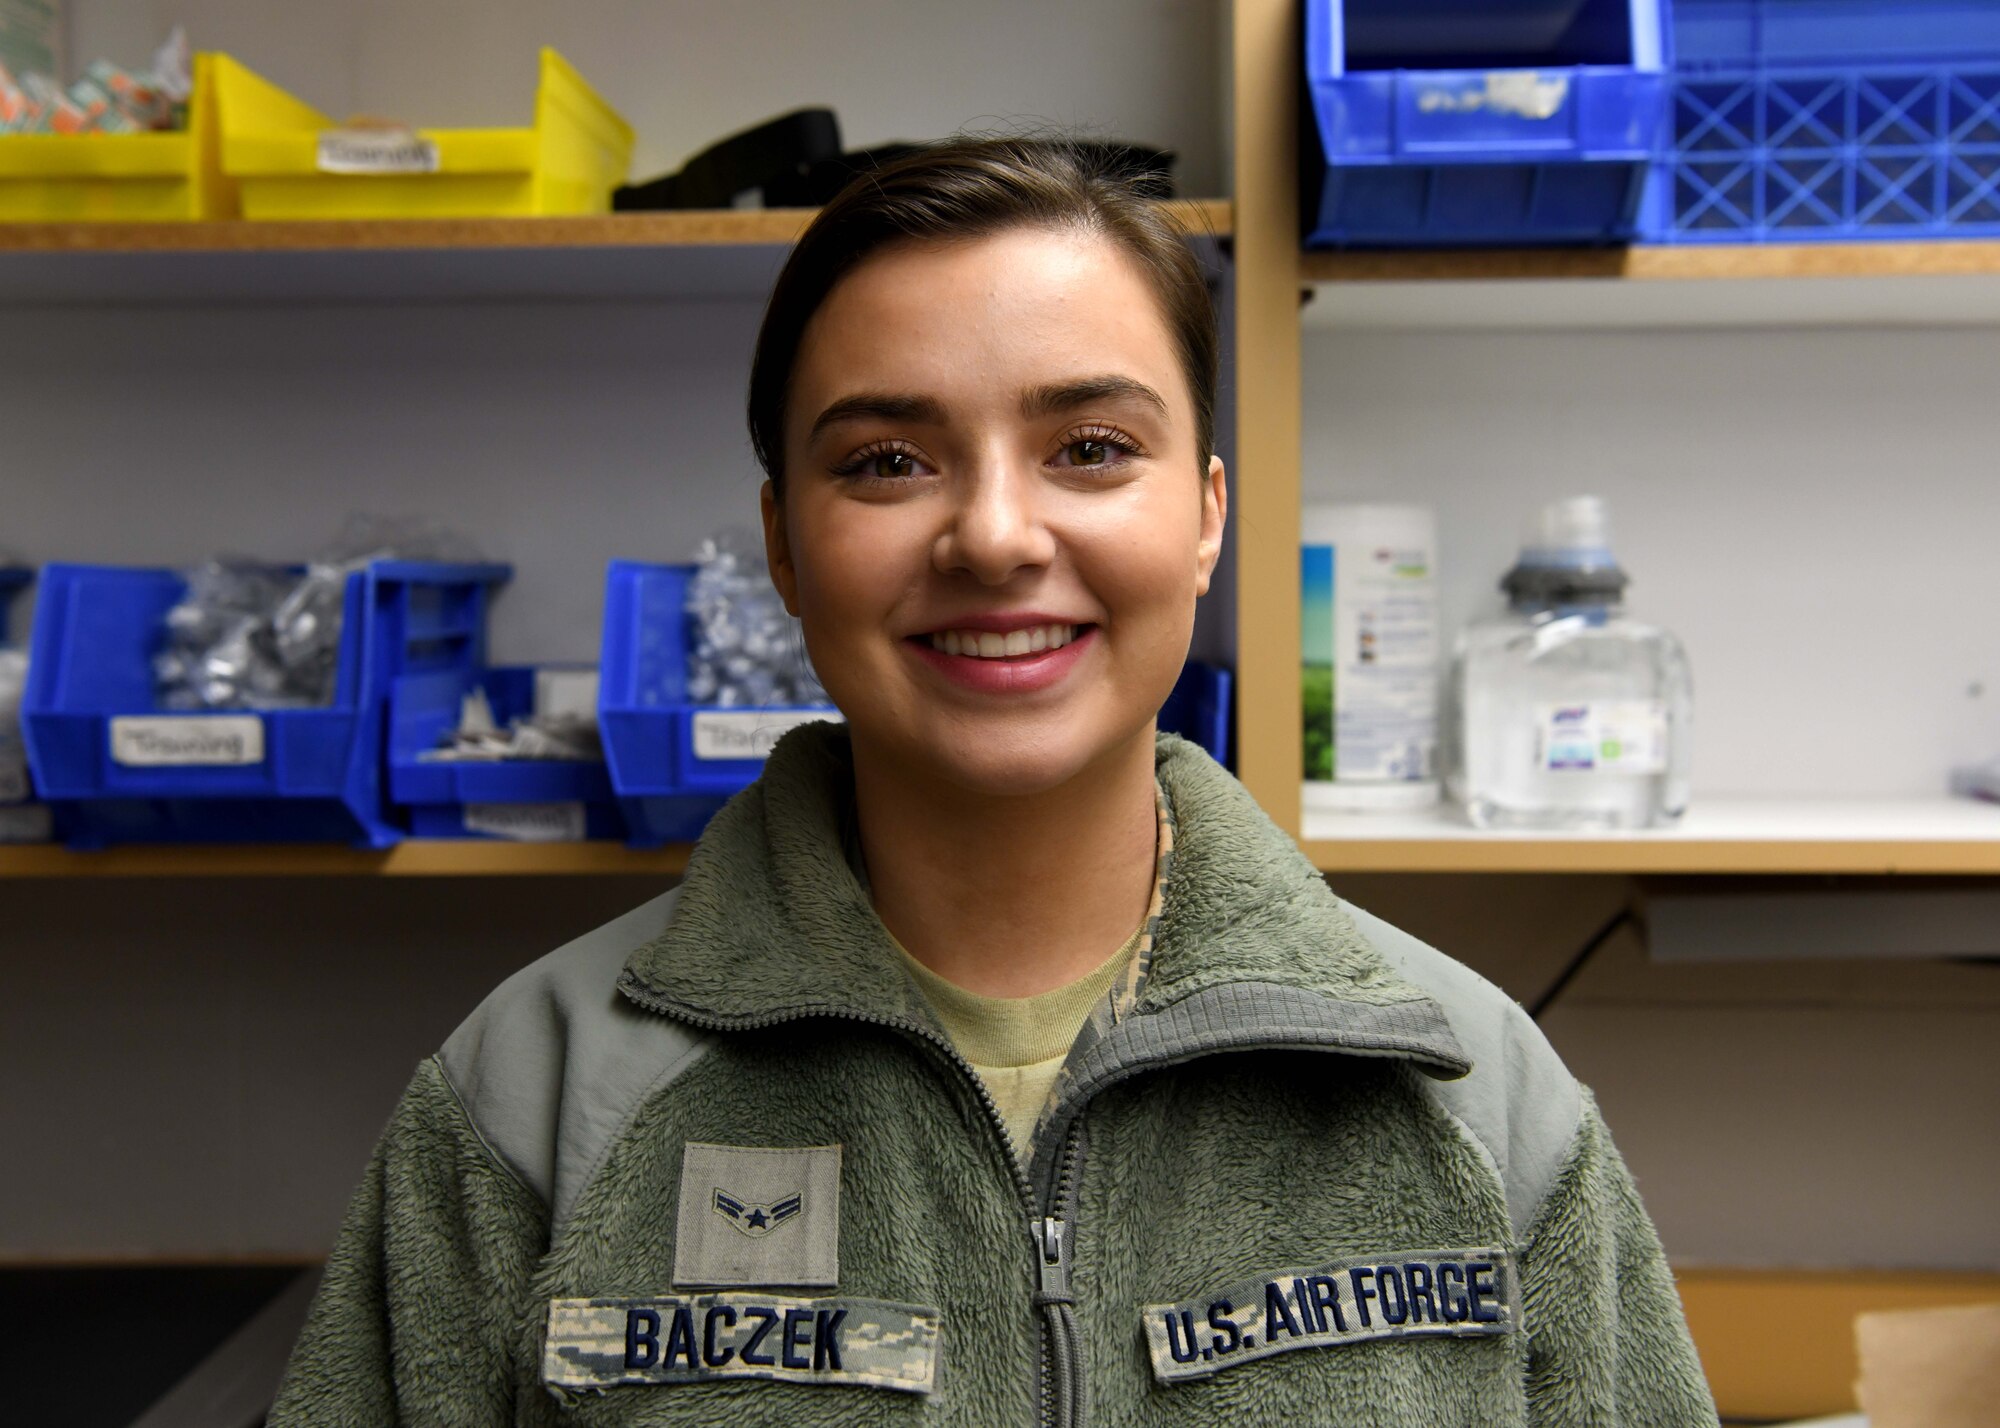 Airman 1st Class Veronica Baczek conducts hearing tests as part of the 104th Fighter wing's periodic health assessments on March 8, 2020. Baczek works in public health and is also a student at Westfield State pursuing her bachelor's degree. (U.S. Air National Guard photo by Airman Camille Lienau)